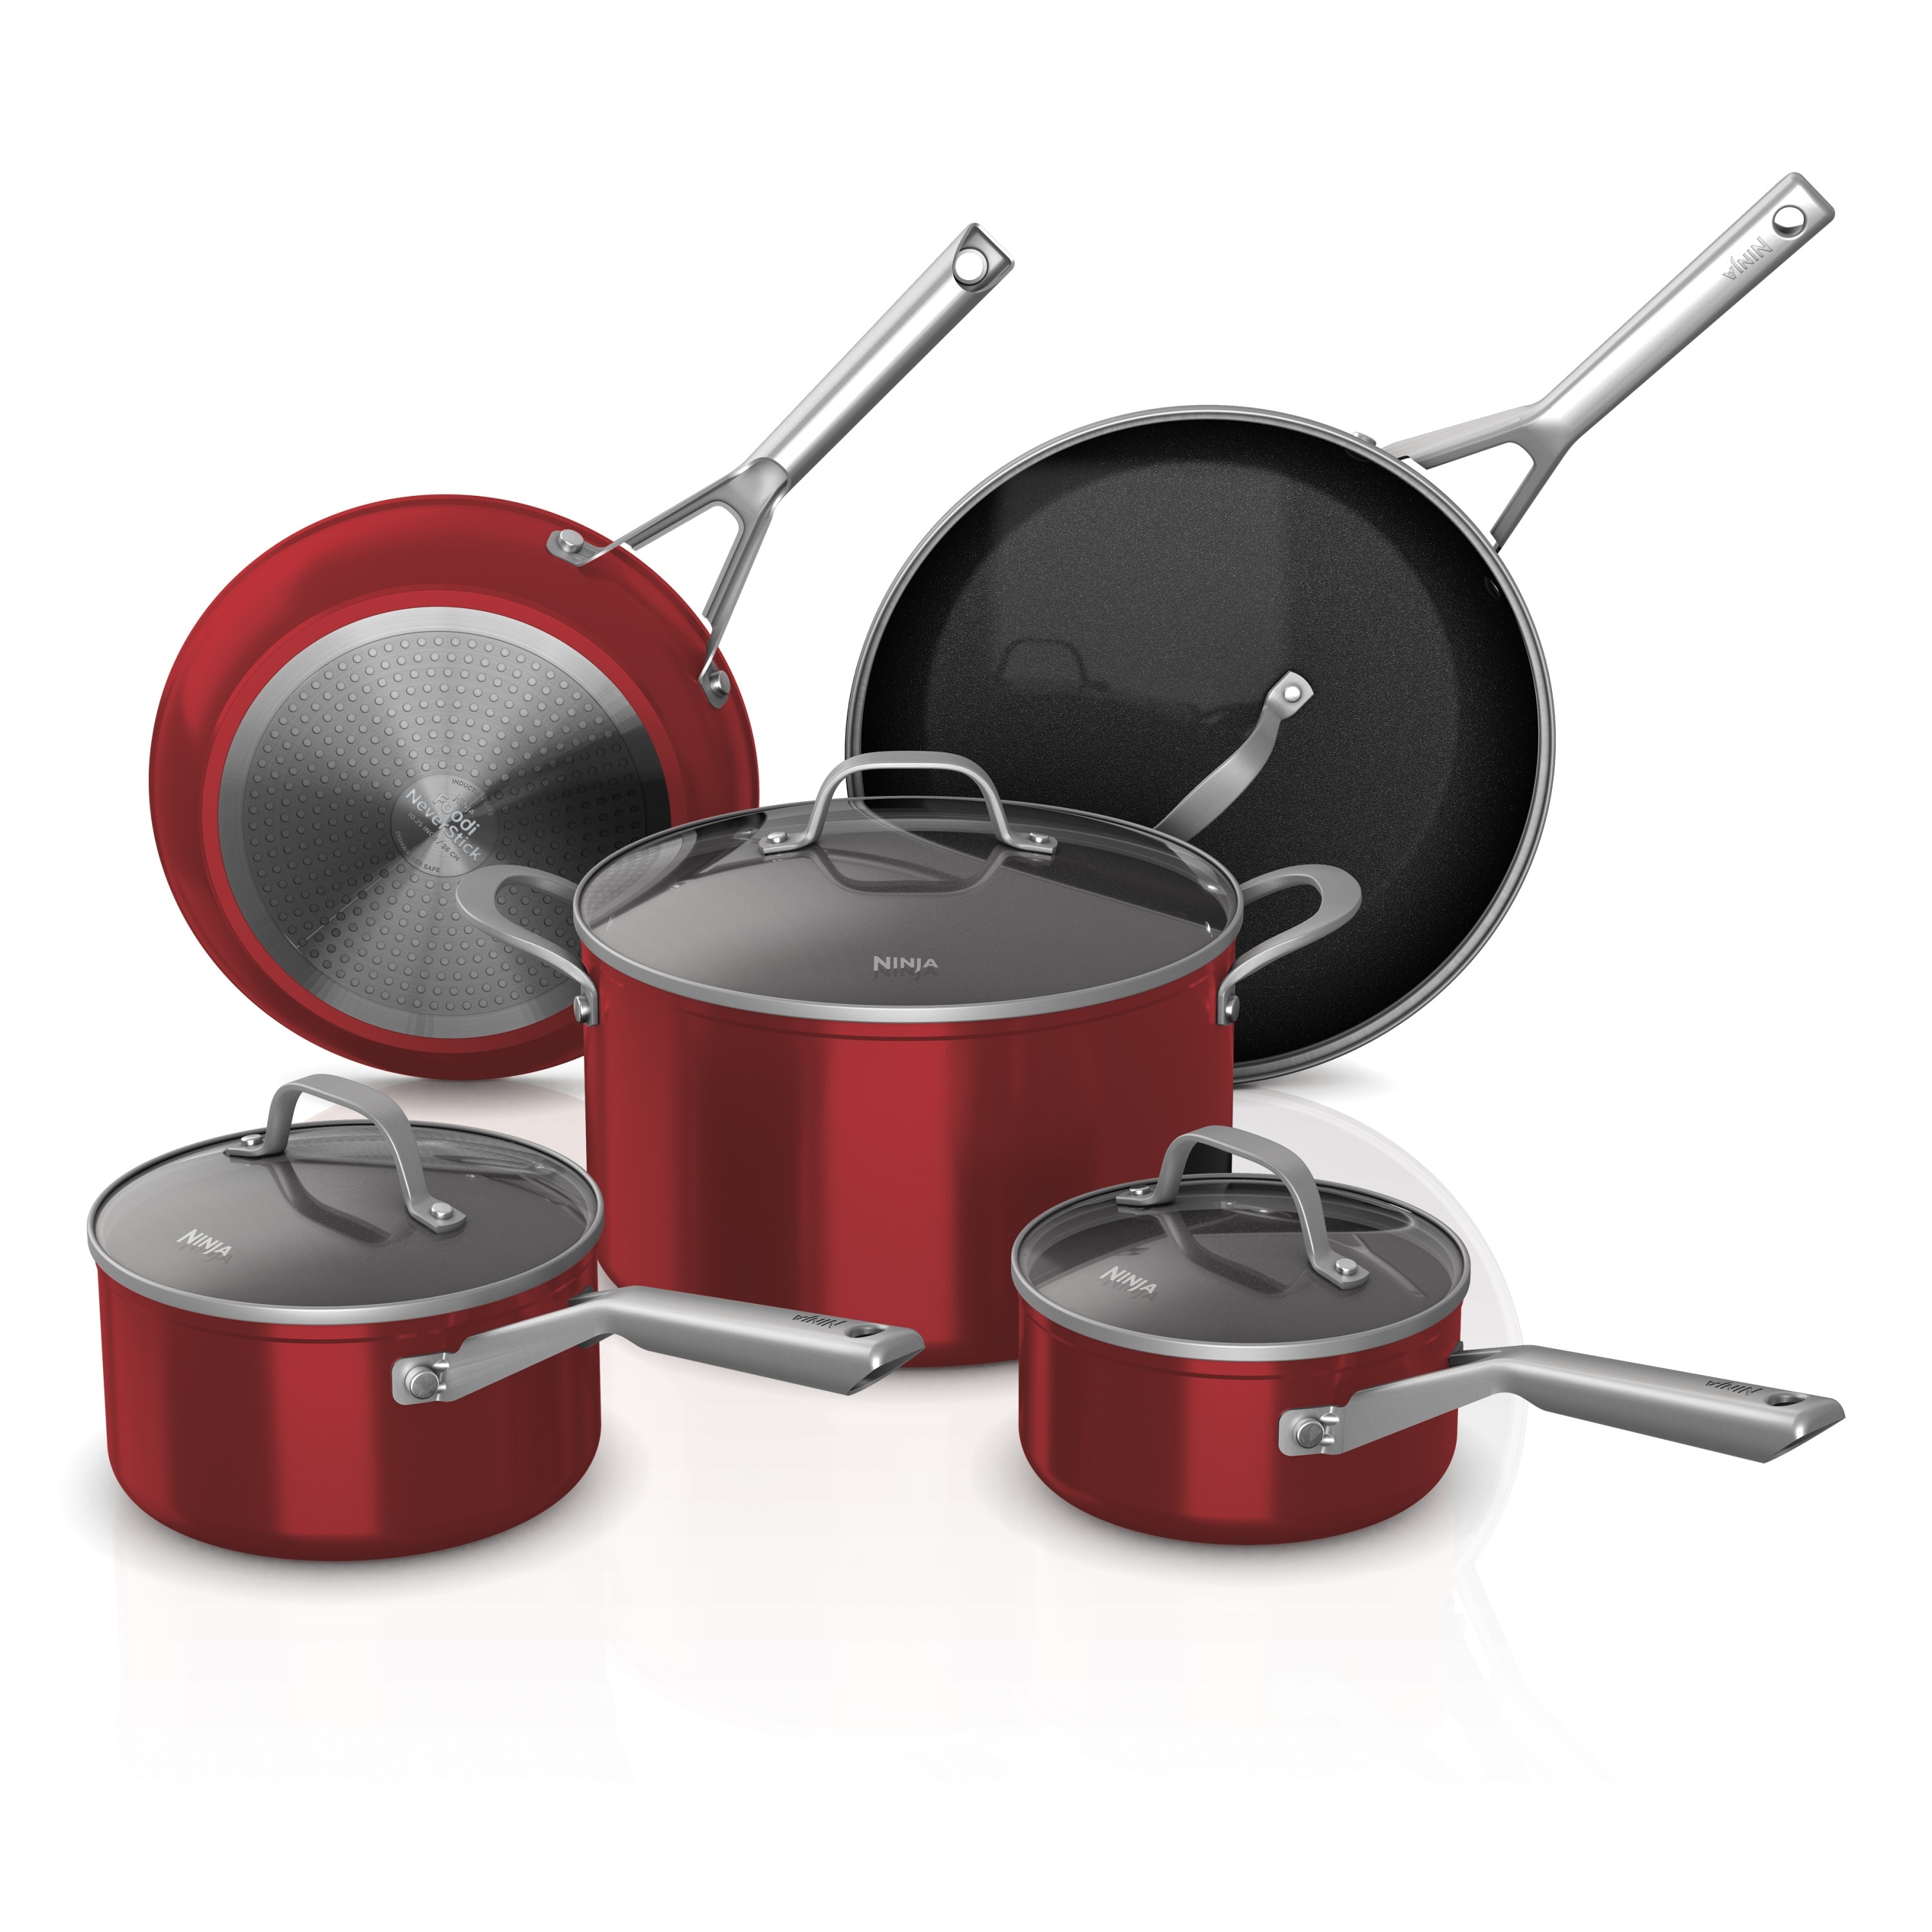 https://ak1.ostkcdn.com/images/products/is/images/direct/80d43f06fdf7bf9e2ce5b77efd52688a2f6dc681/Ninja-Foodi-NeverStick-Essential-9-Piece-Cookware-Set%2C-Red.jpg